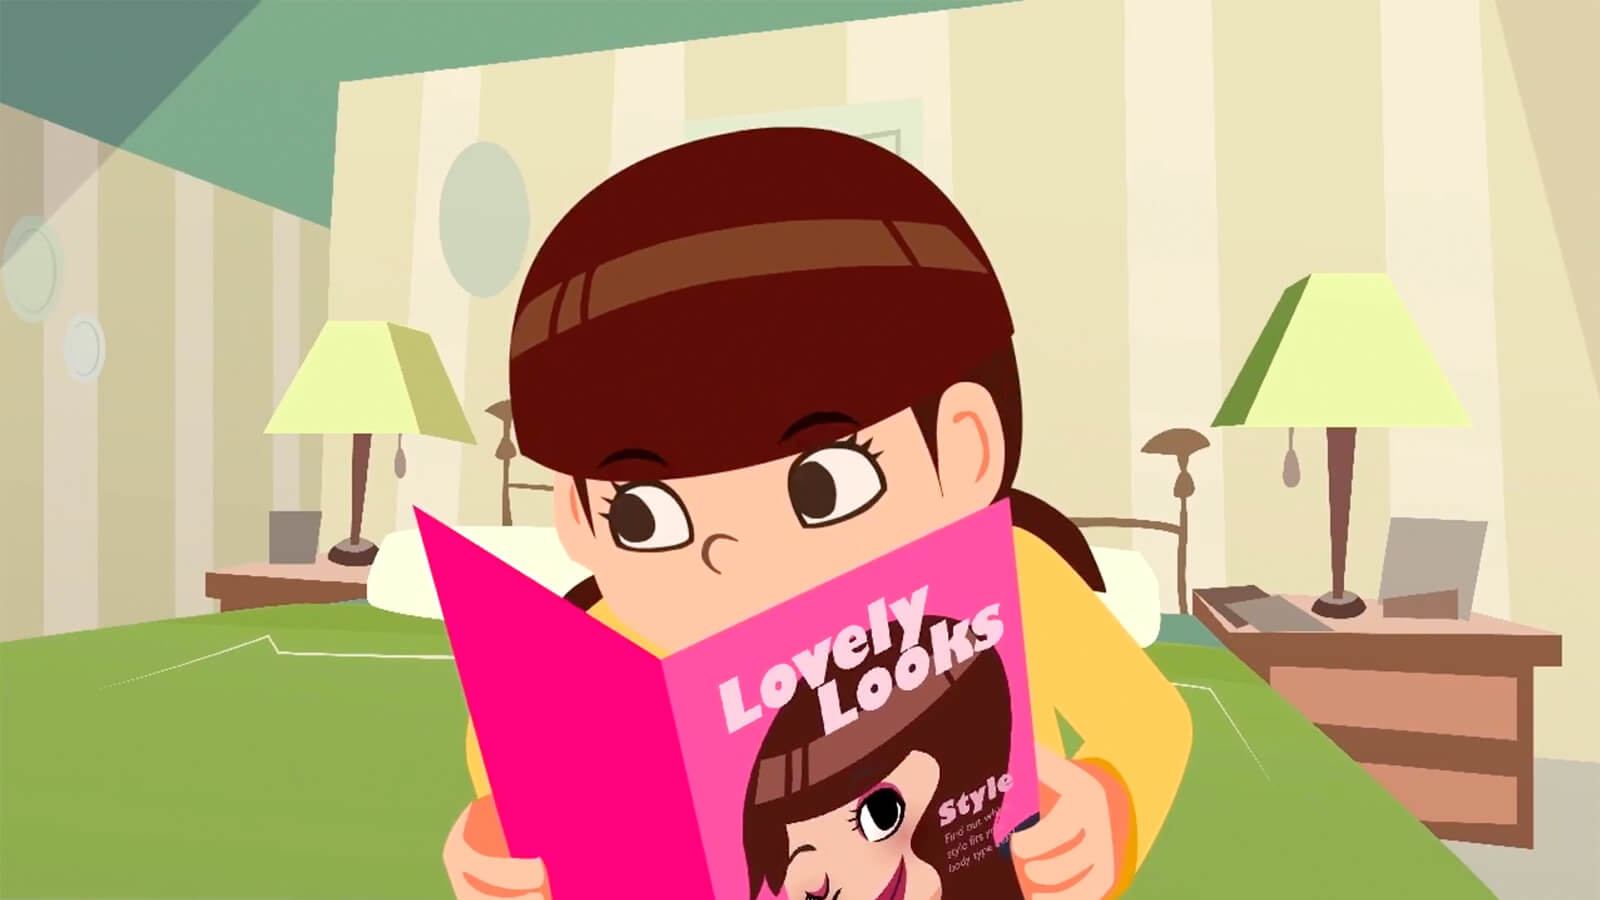 A young, brown-haired girl looks up from behind a fashion magazine titled "Lovely Looks" while sitting on a green bed.